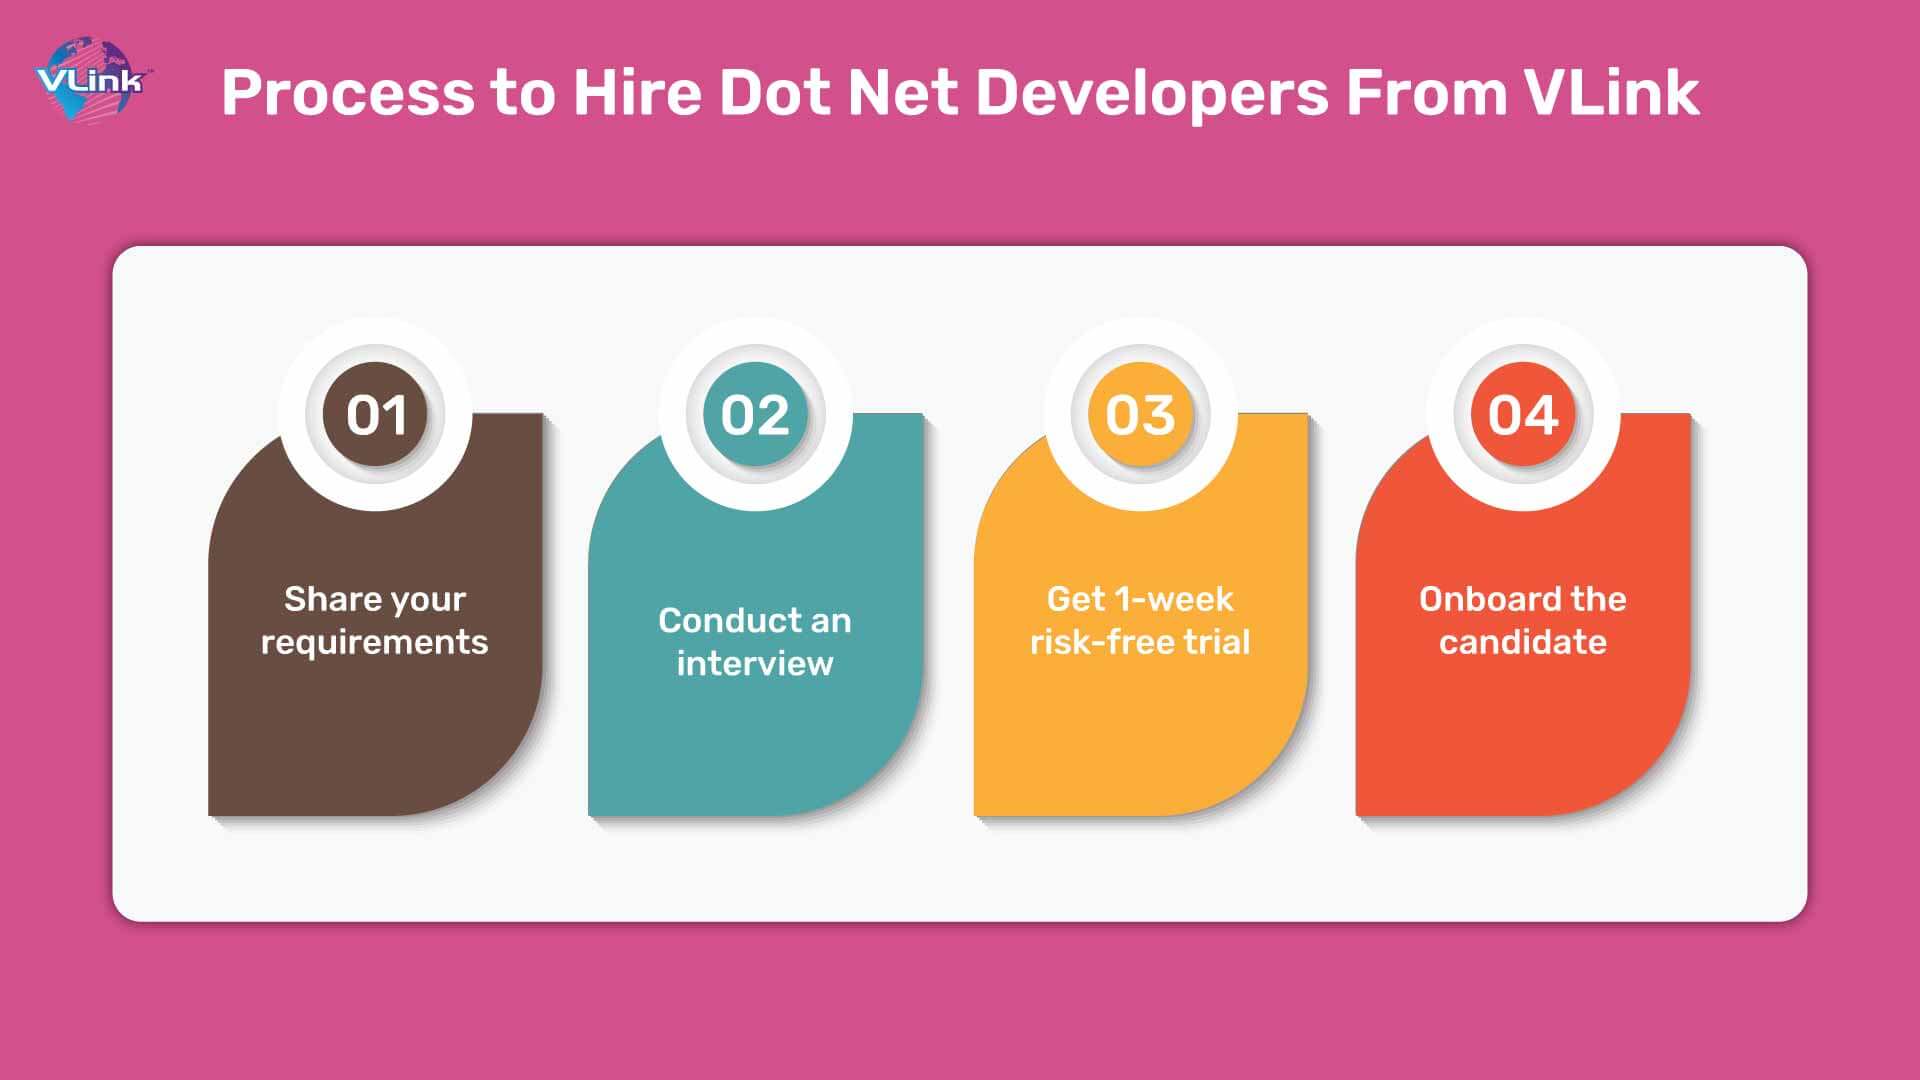 Process to Hire Dot-Net Developers With VLink